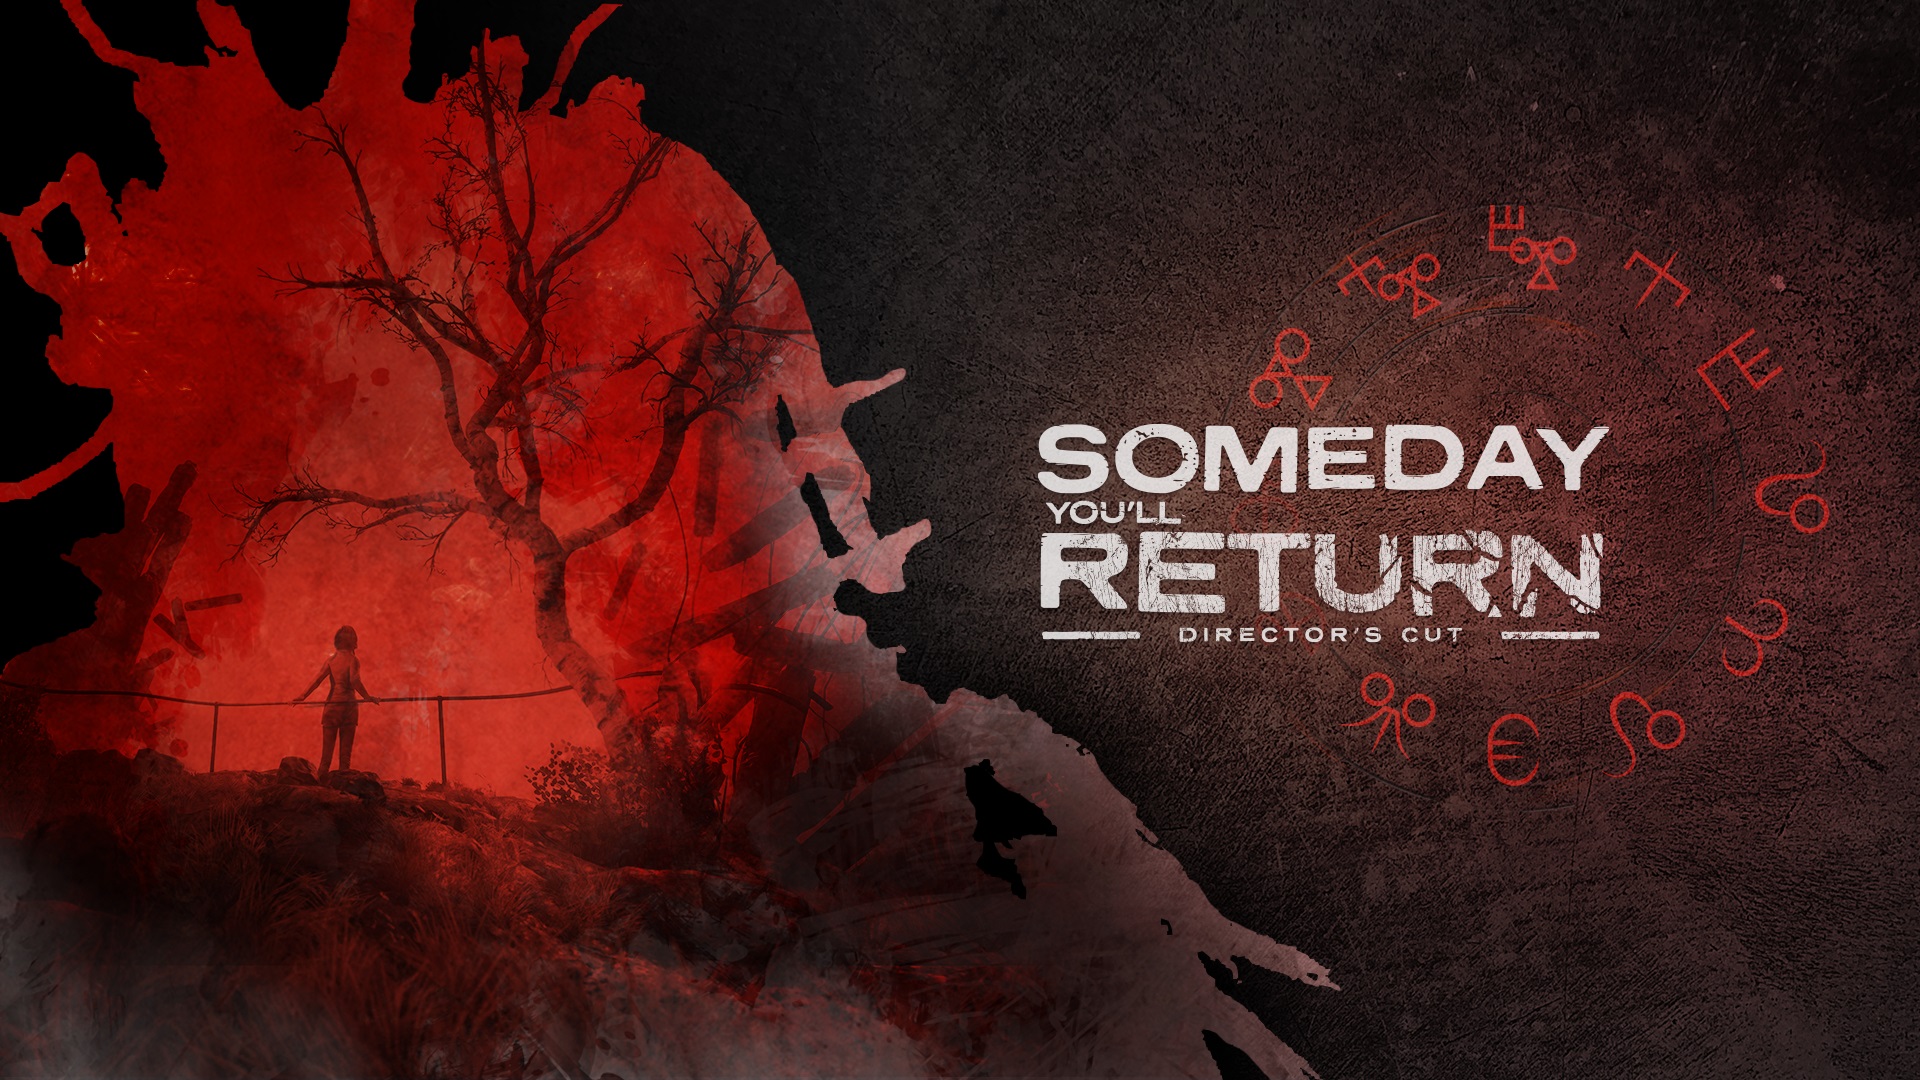 Someday You’ll Return: Director’s Cut is now available